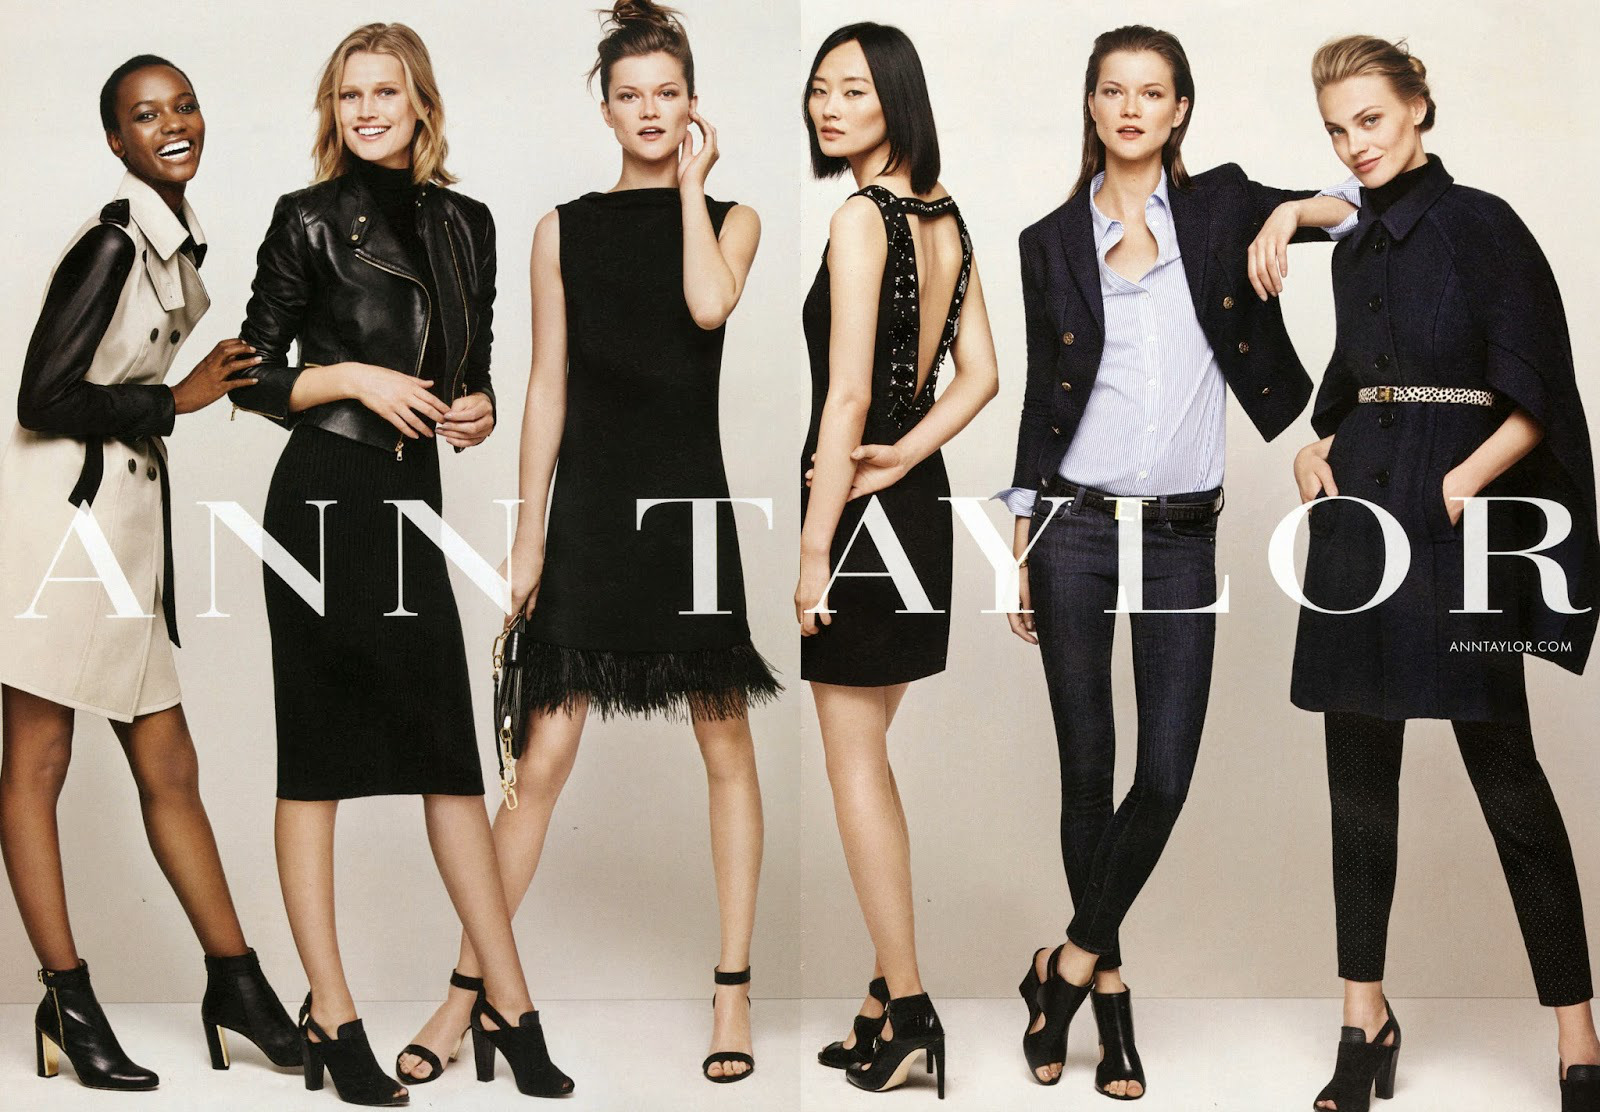 Interested in a brand-name company like Ann Taylor? â€“ Bentley CareerEdge